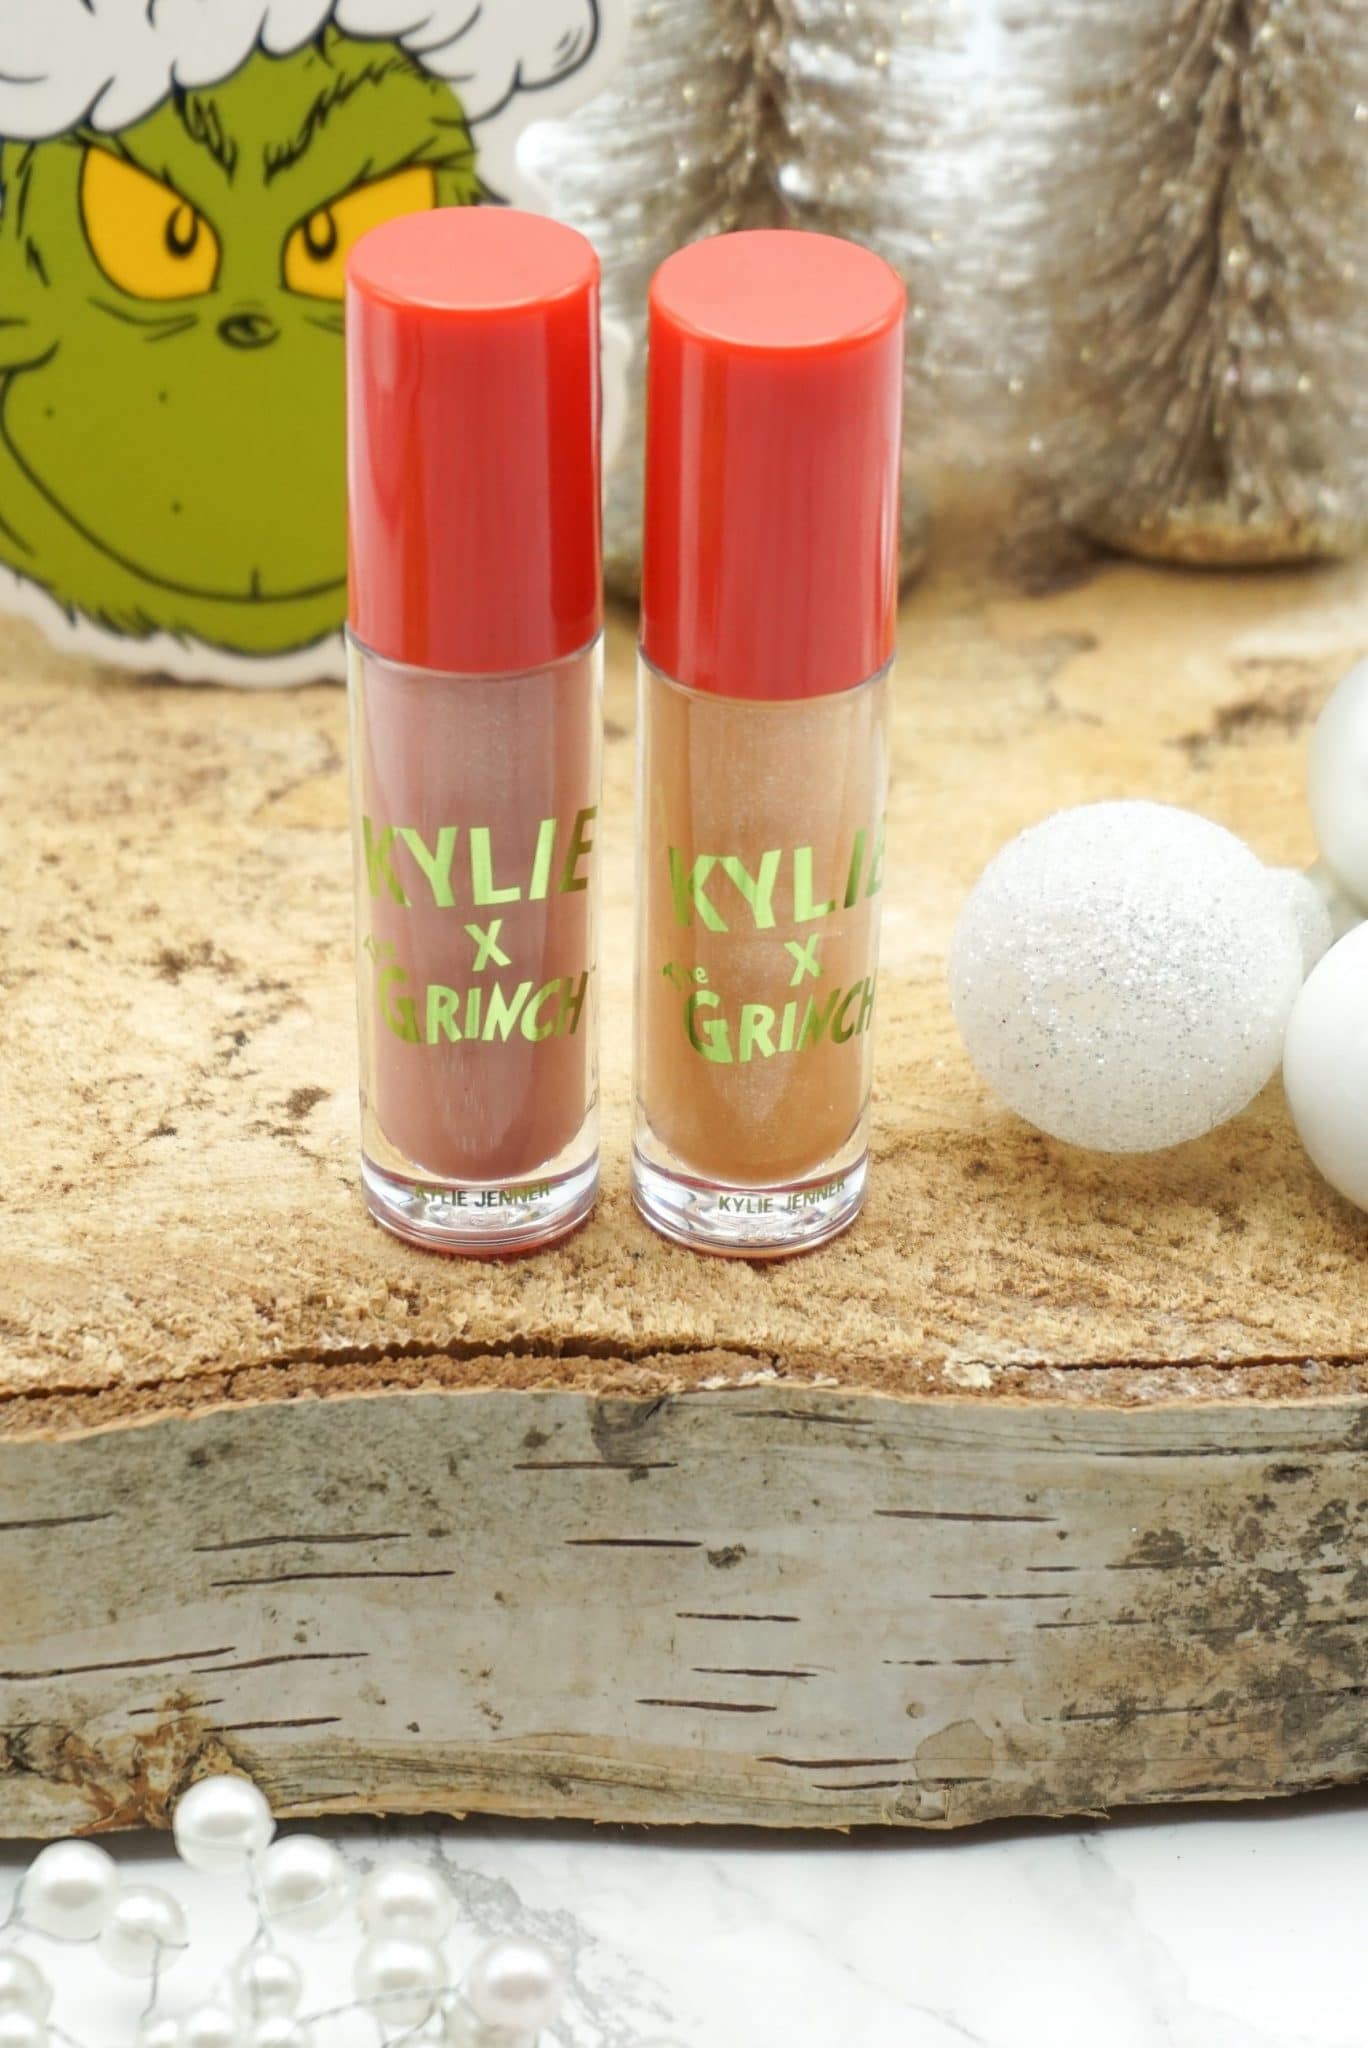 Kylie Cosmetics X The Grinch Holiday Collection 2020